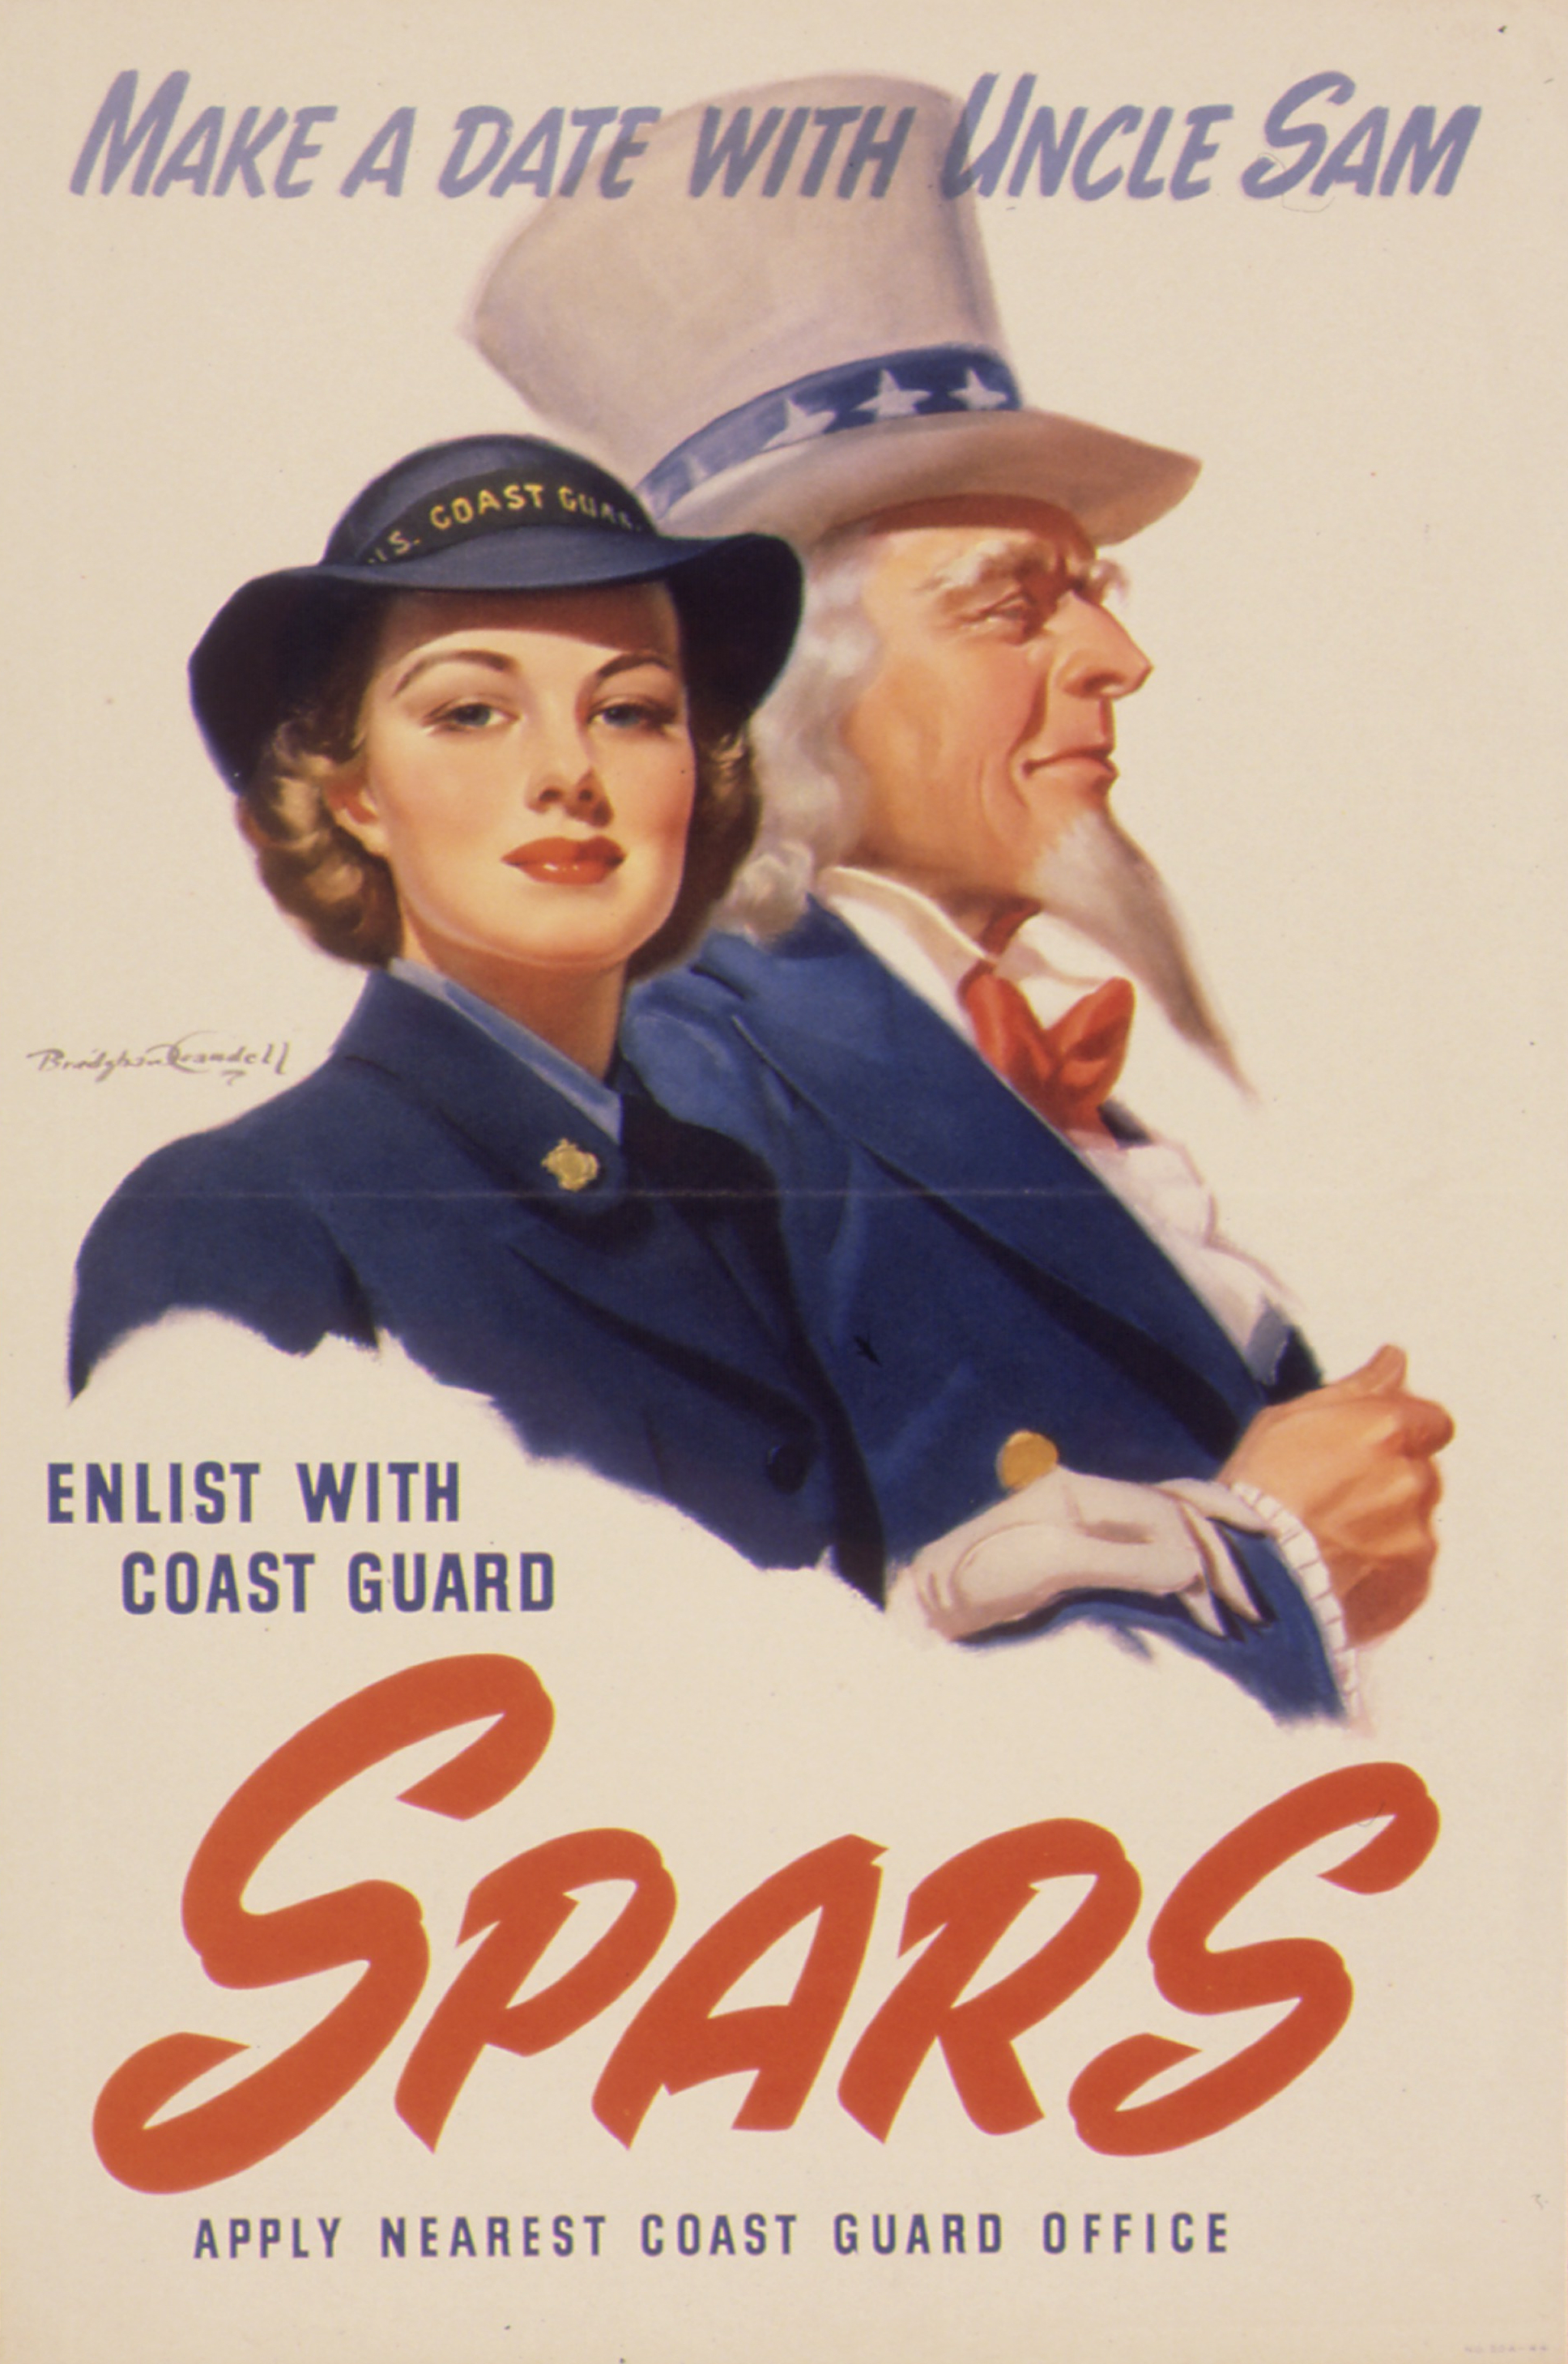 Make a Date with Uncle Sam SPARS Recruiting Poster